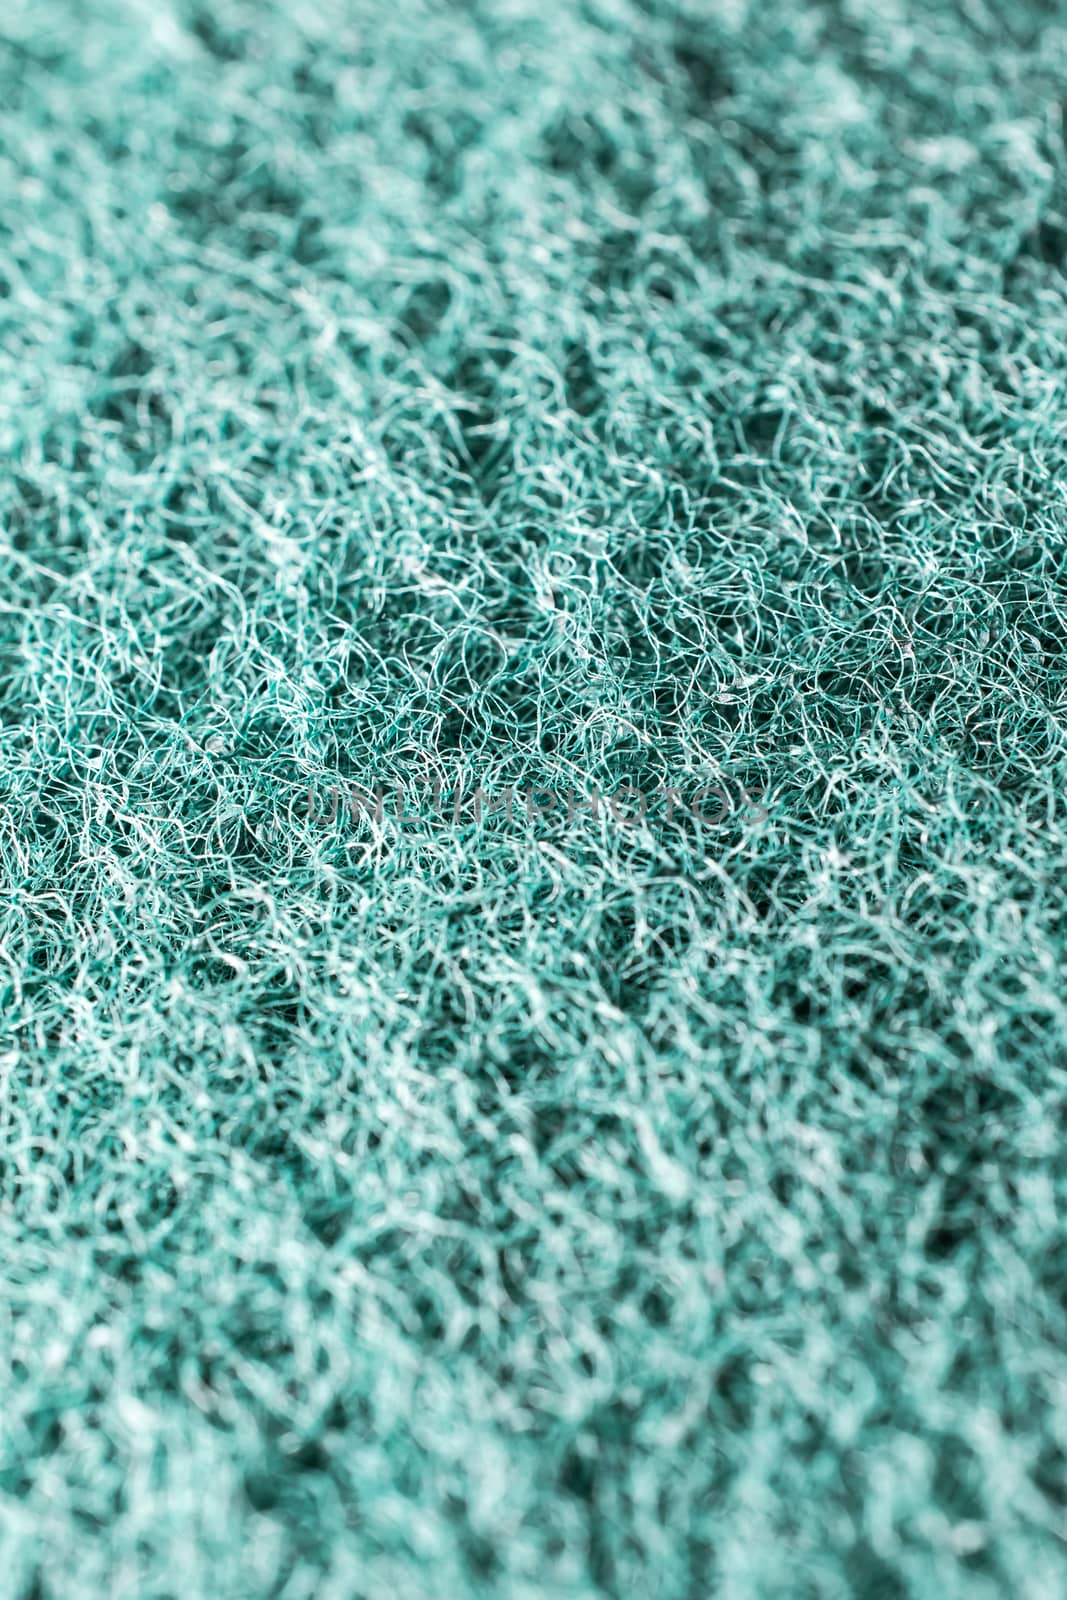 Close-up of a green cleaning sponge surface as a backdrop backgr by pitchaphan